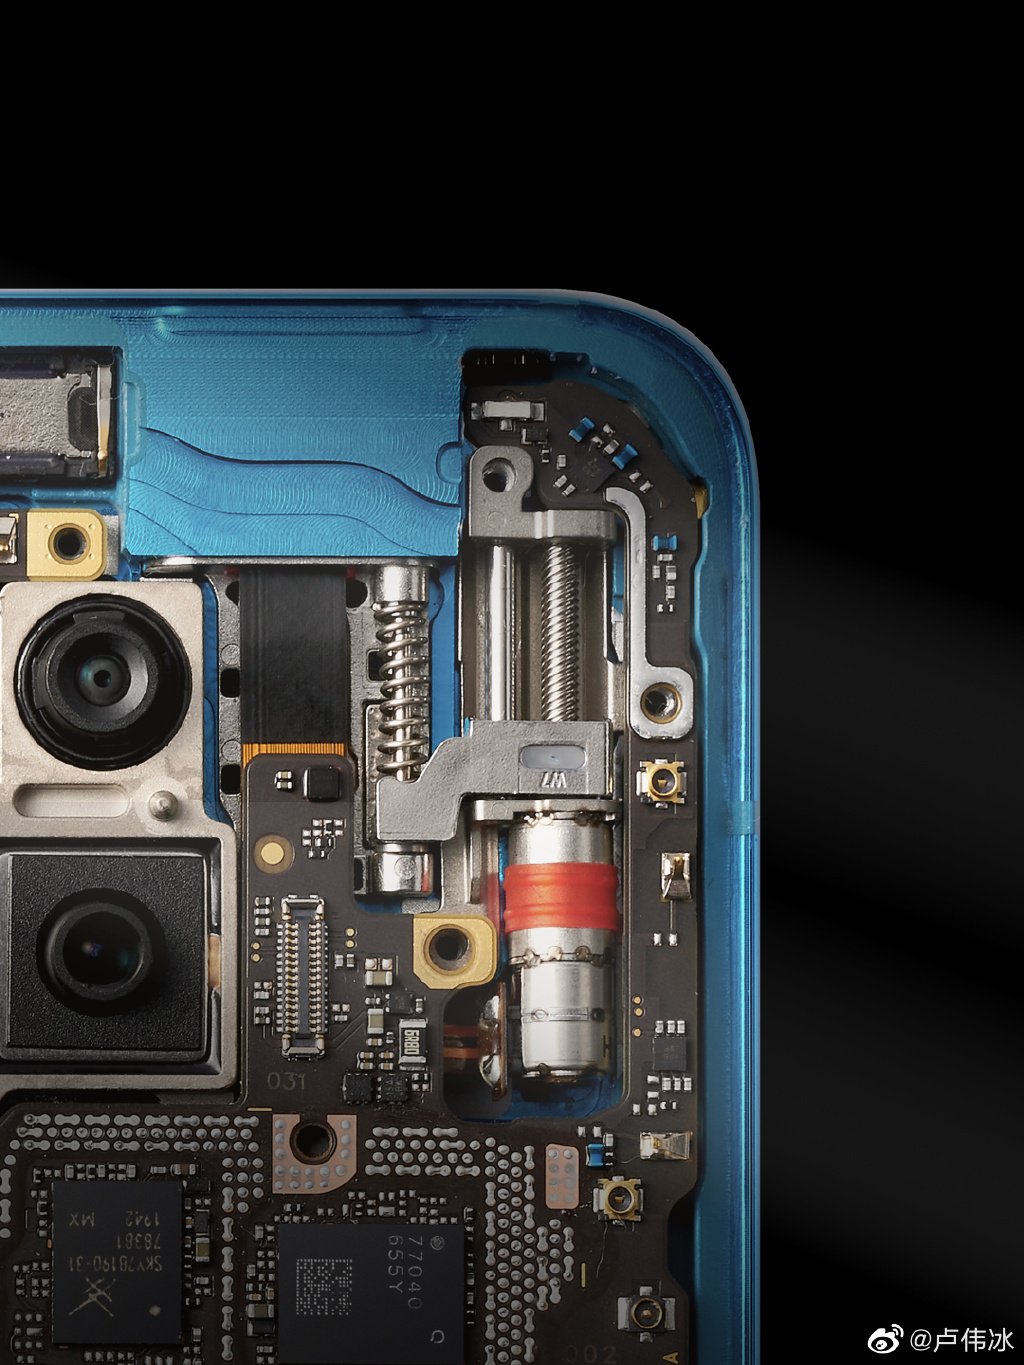 Redmi K30 Pro crams 61 components per sq centimeter with ‘Stacked Motherboard’ design 2